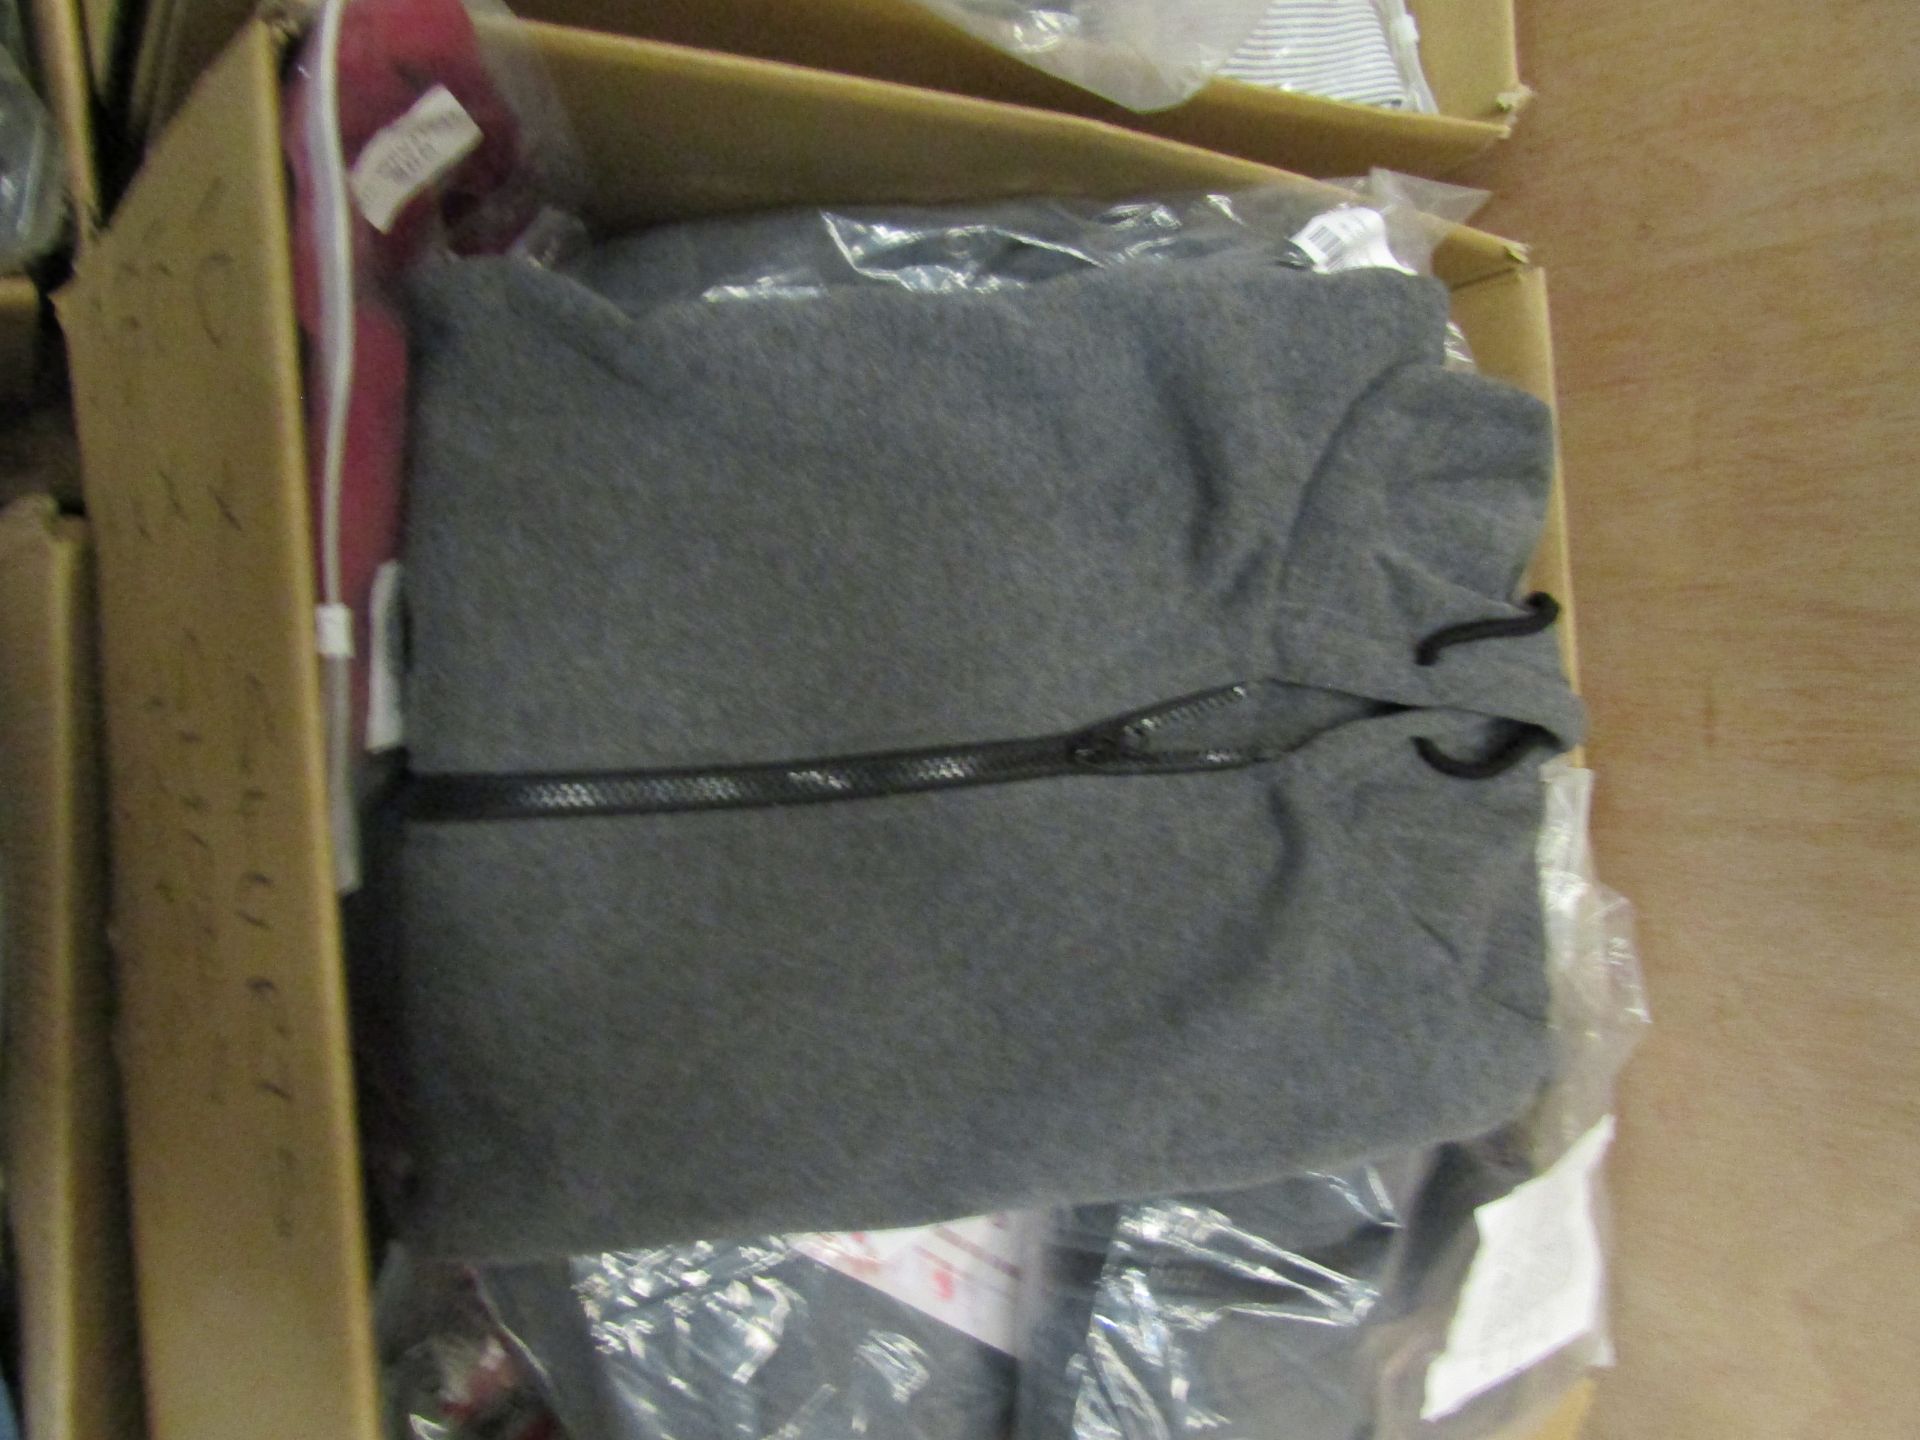 box of Mixed Amazon Shoes and and Clothing all new, consists of 10 shoes and 25 pieces of clothing - Image 2 of 2